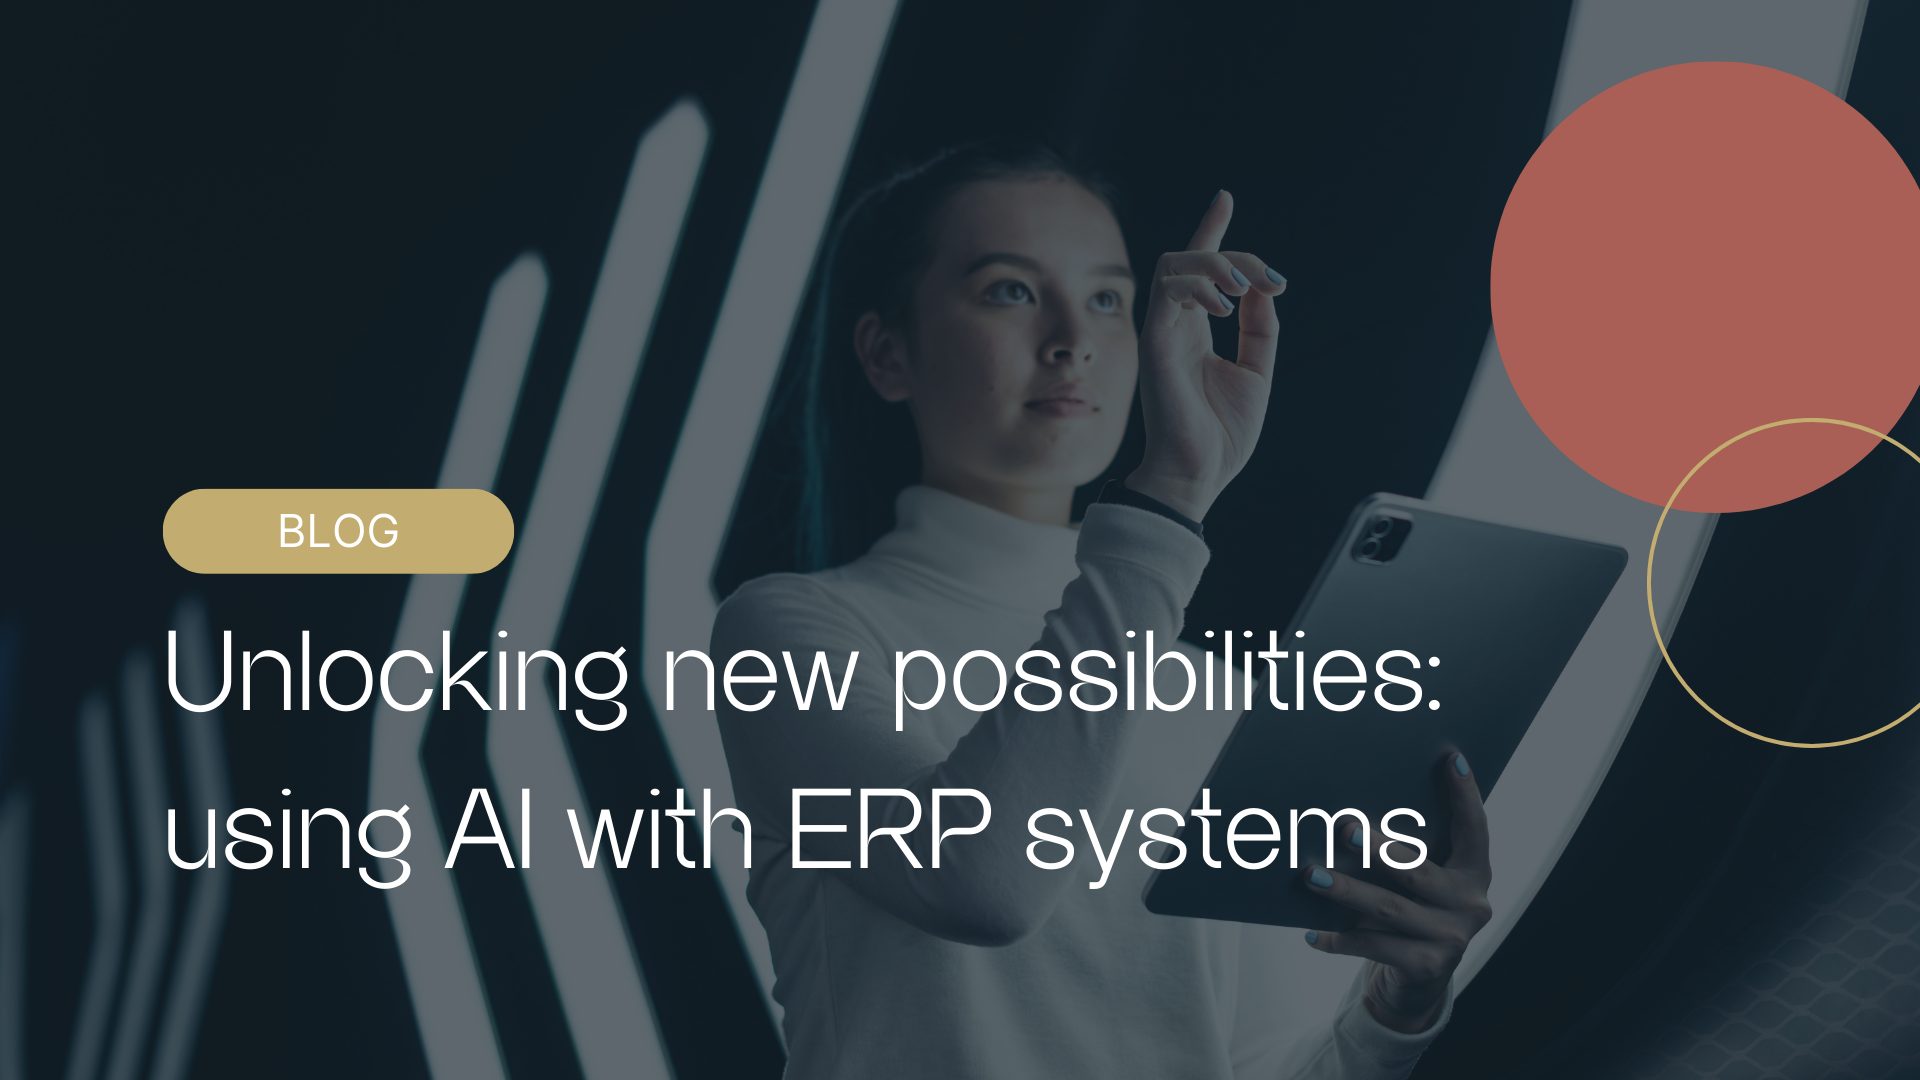 using AI with ERP systems